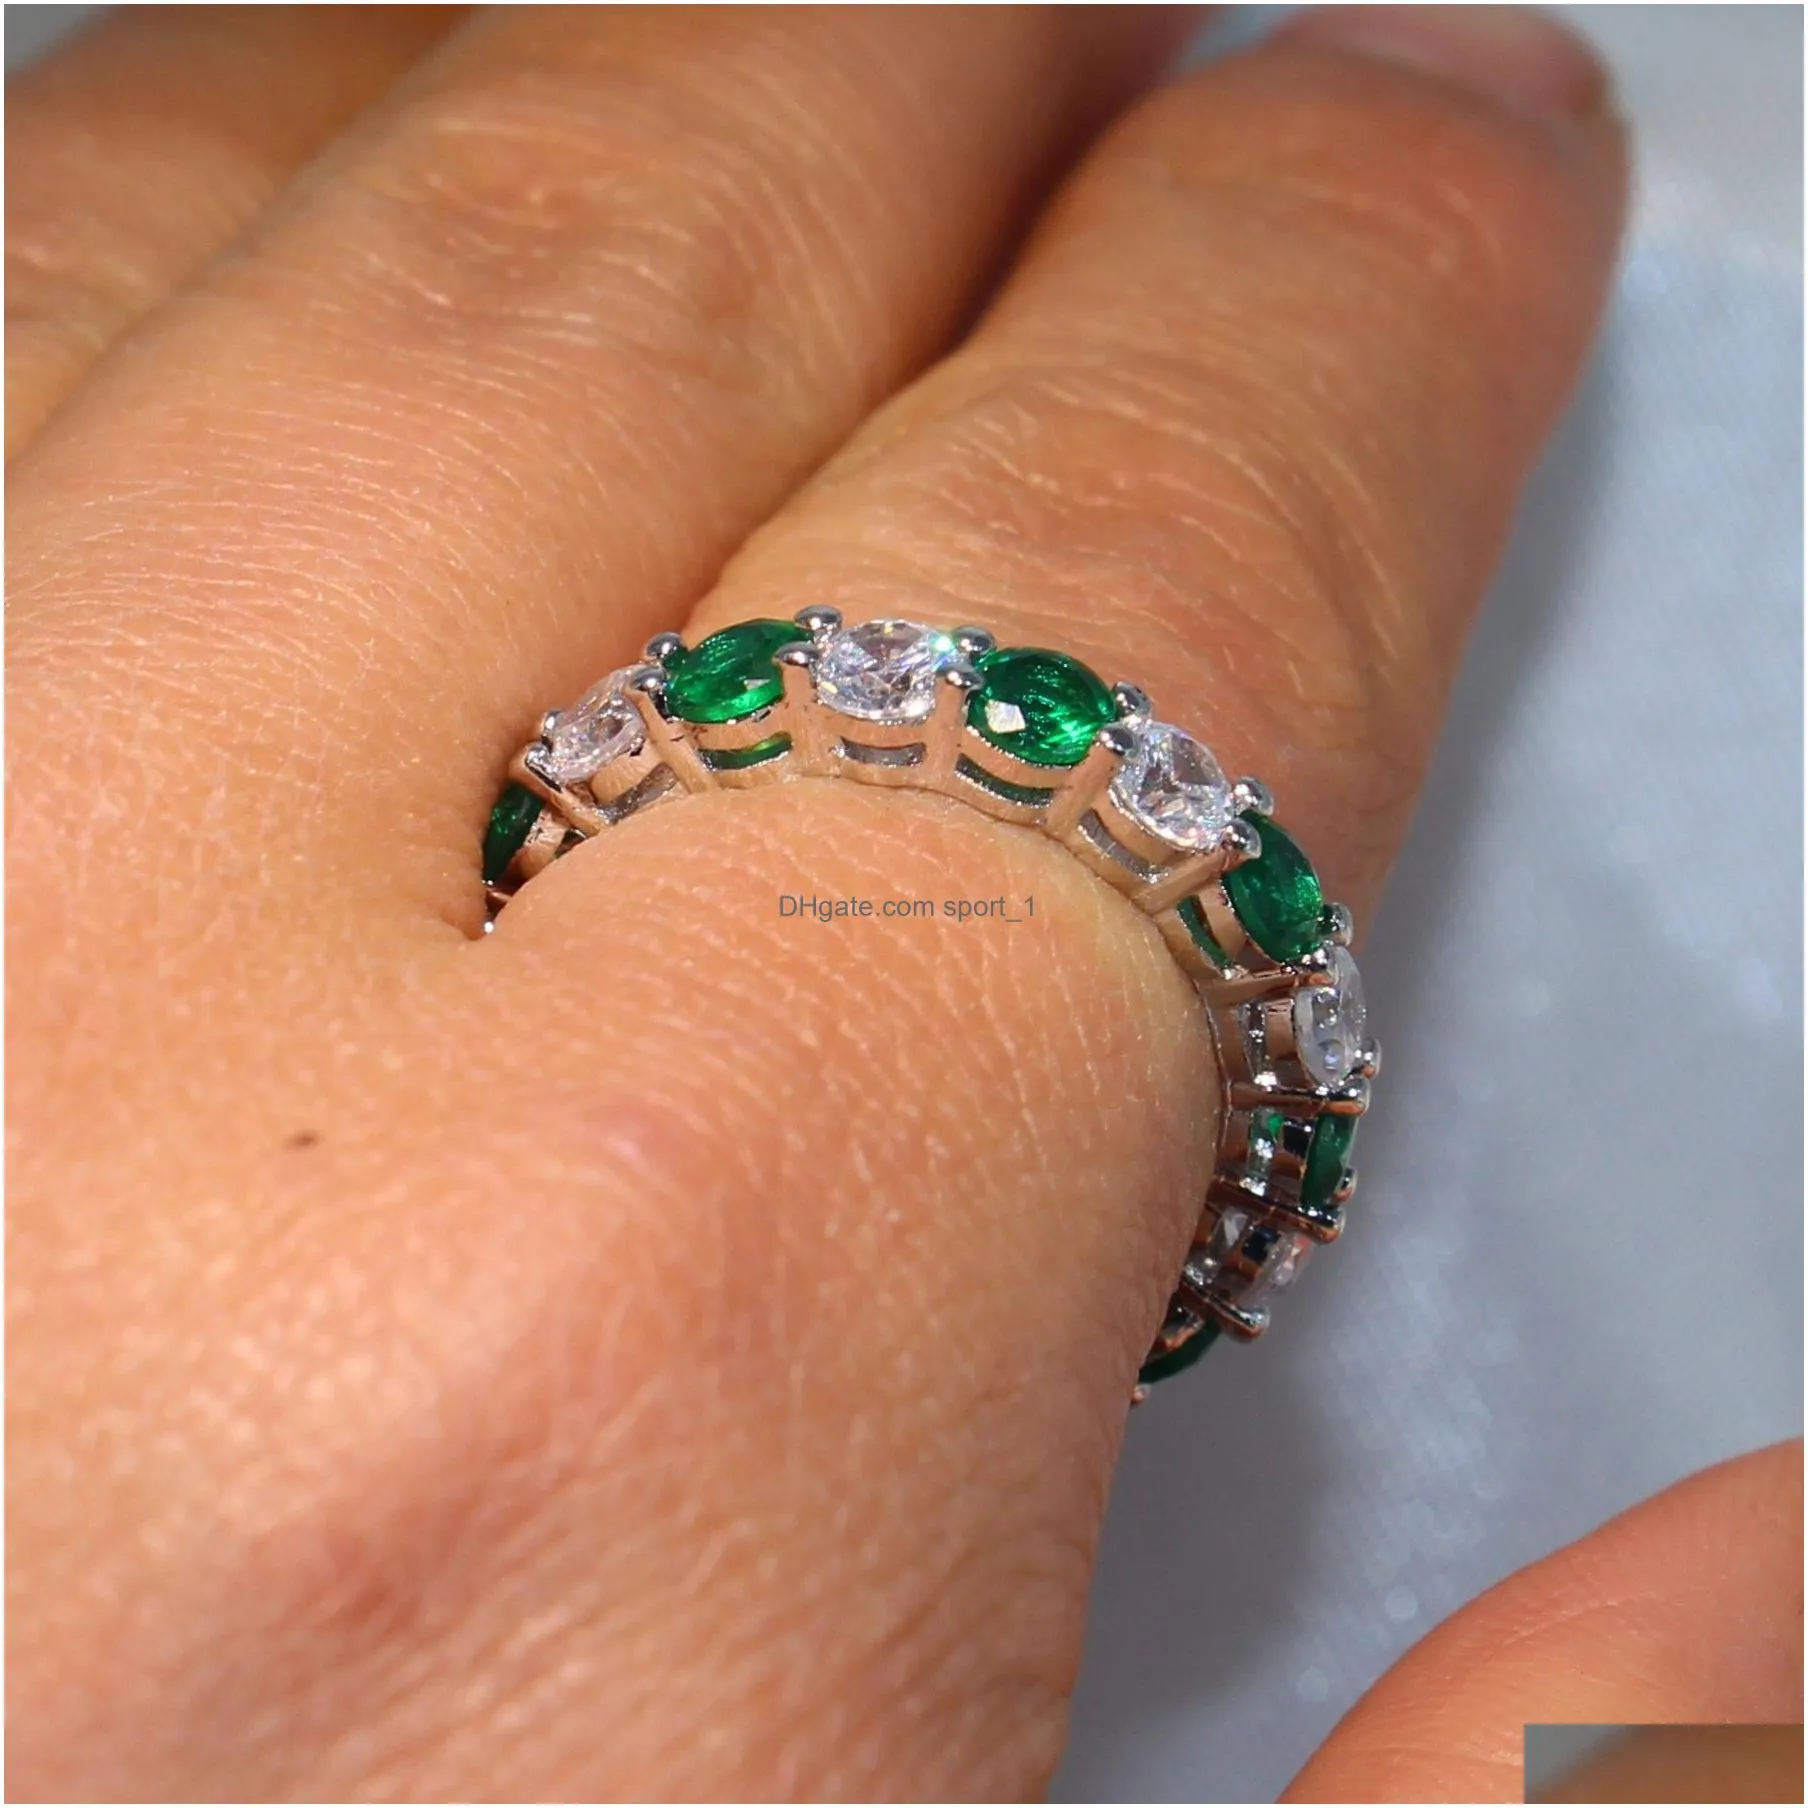 2018 sparkling brand luxury jewelry 925 sterling silver round cut emerald zirconia women wedding band circle ring gift